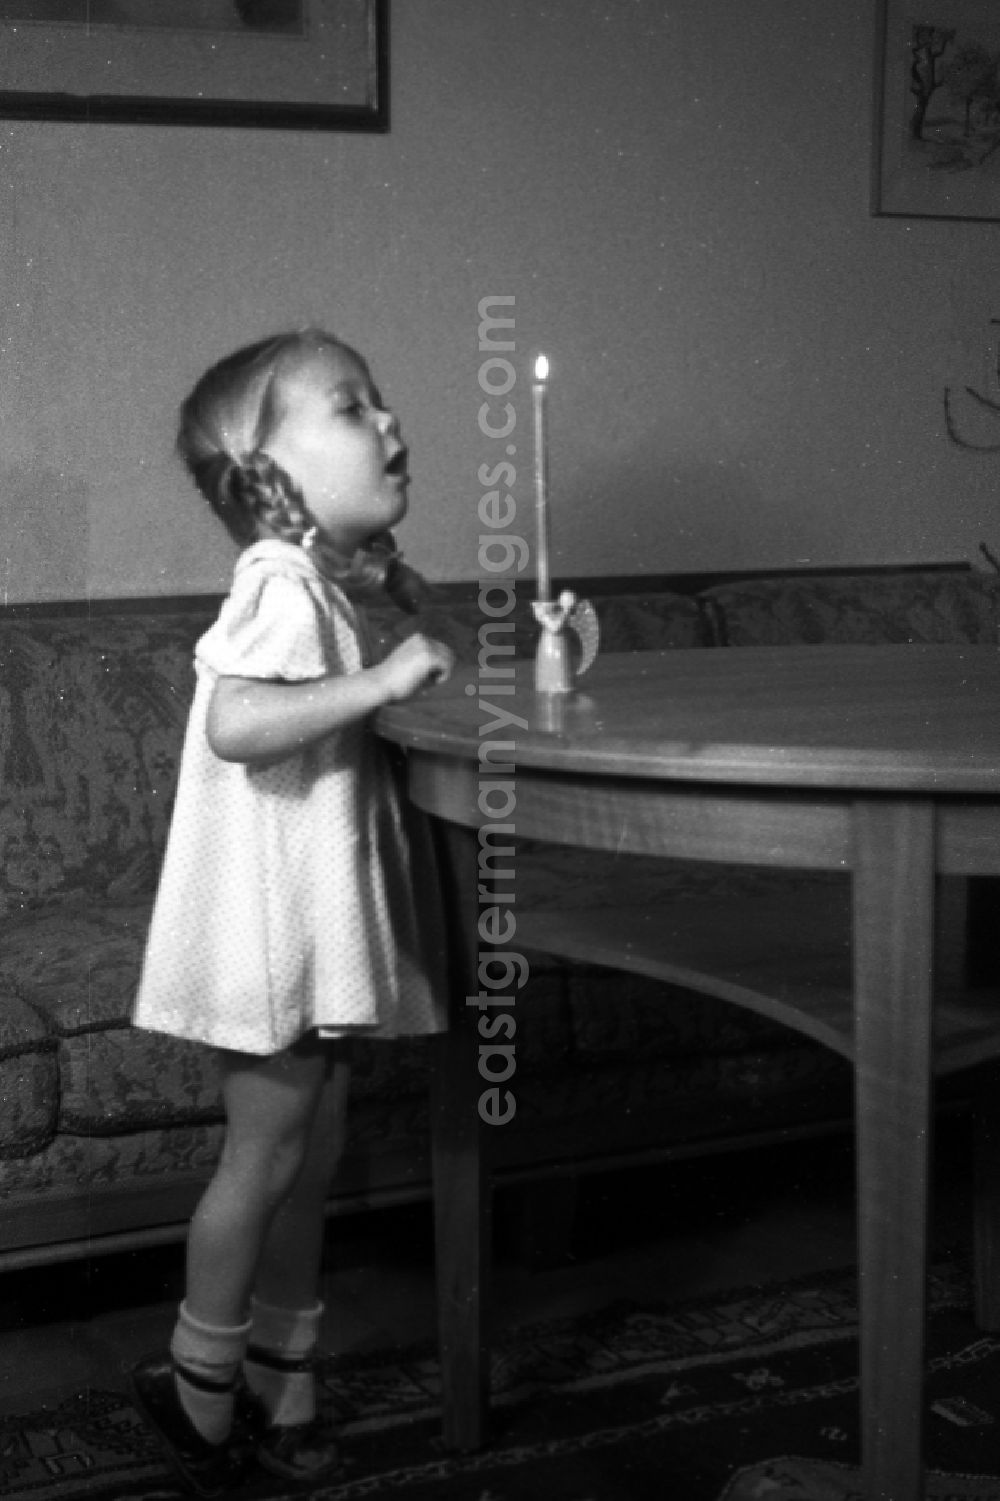 GDR photo archive: Merseburg - A small girl with plaits tries to blow out a candle which stands on the table, in Merseburg in the federal state Saxony-Anhalt in Germany